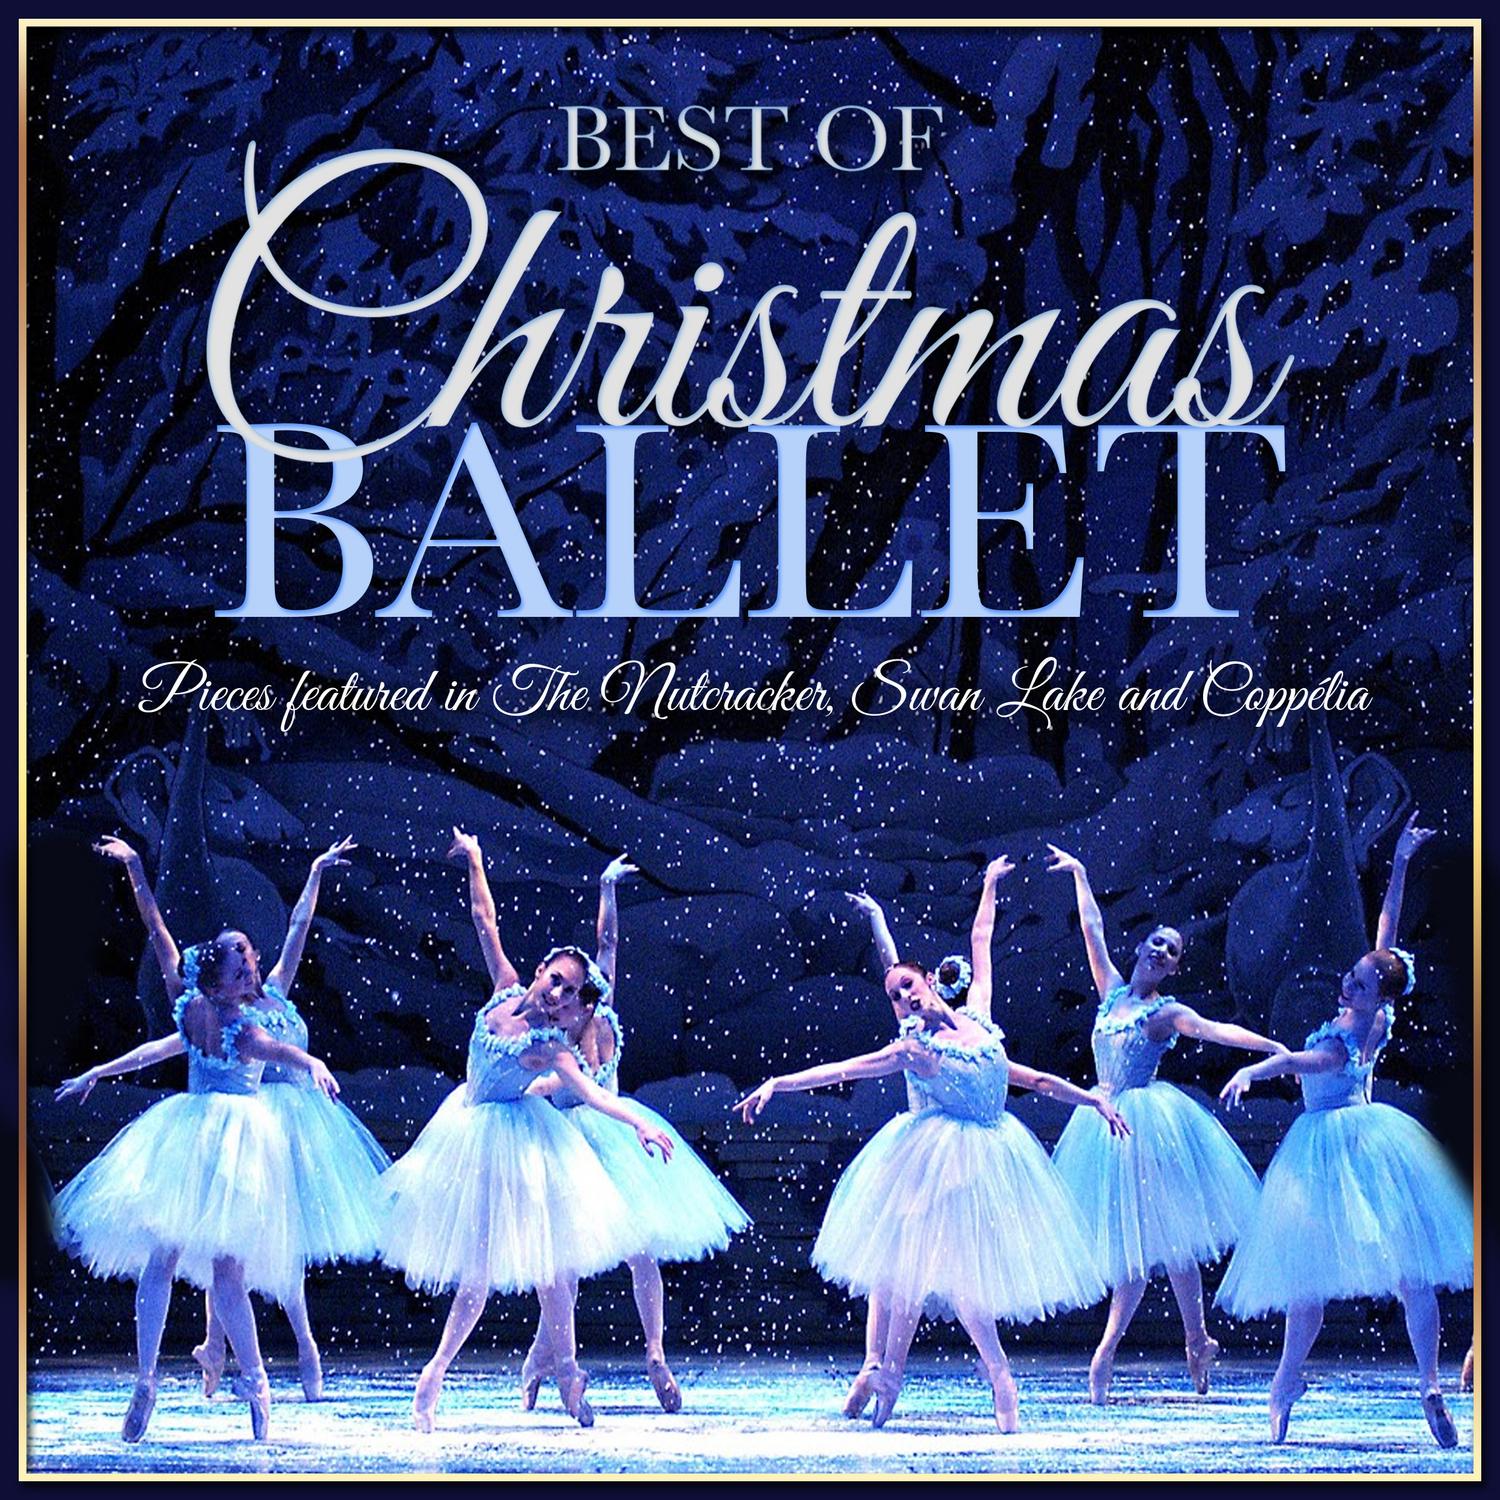 Best of Christmas Ballet  Pieces Featured in the Nutcracker, Swan Lake and Coppe lia